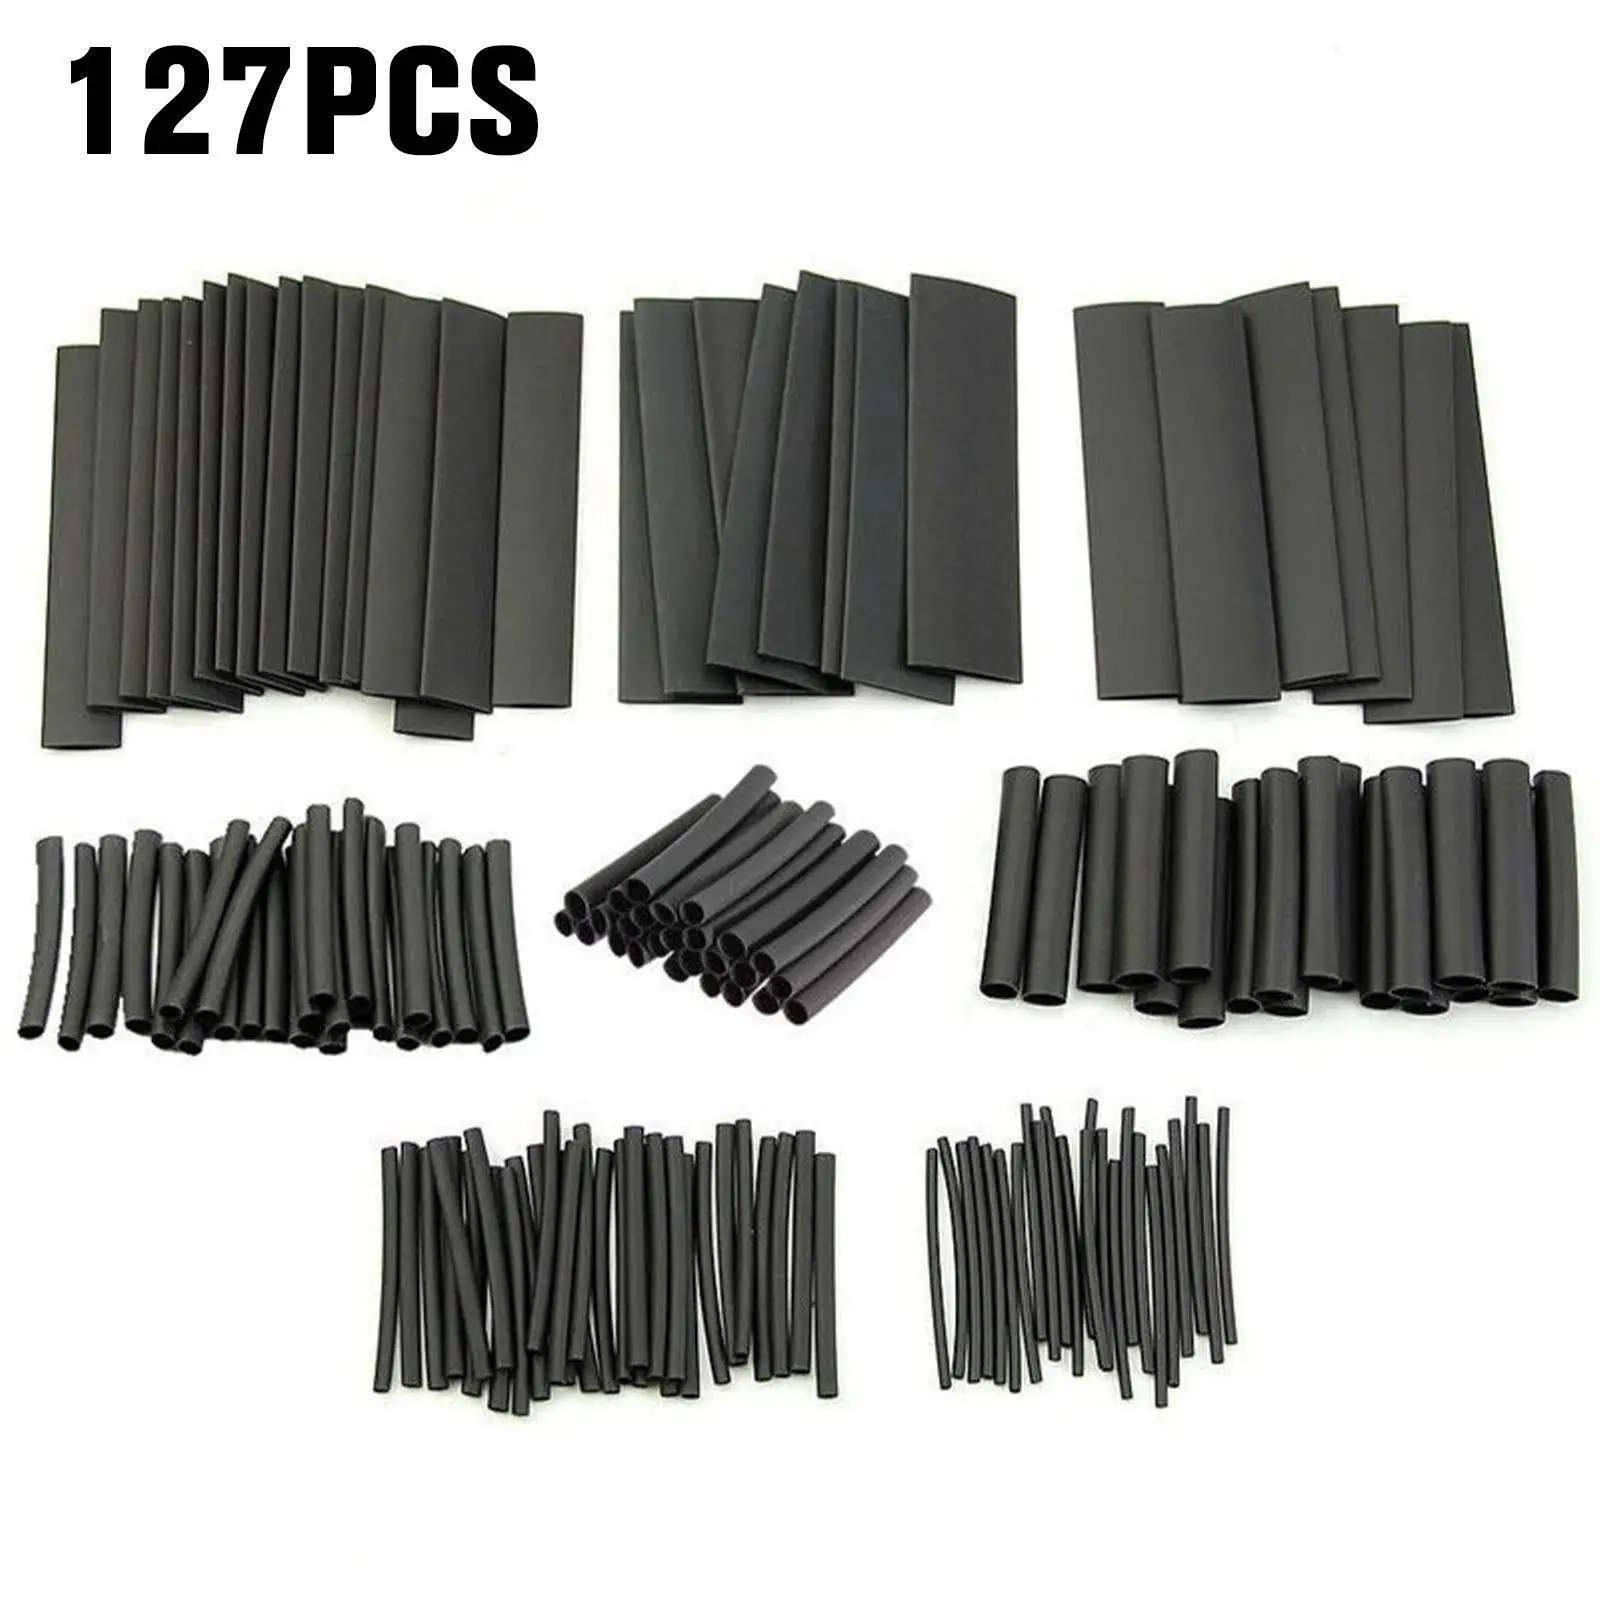 127Pcs Heat Shrink Tube Wires Shrinking Wrap Tubing Wire Connect Cover Protection Cable Electric Cable Waterproof 2:1 Shrinkable